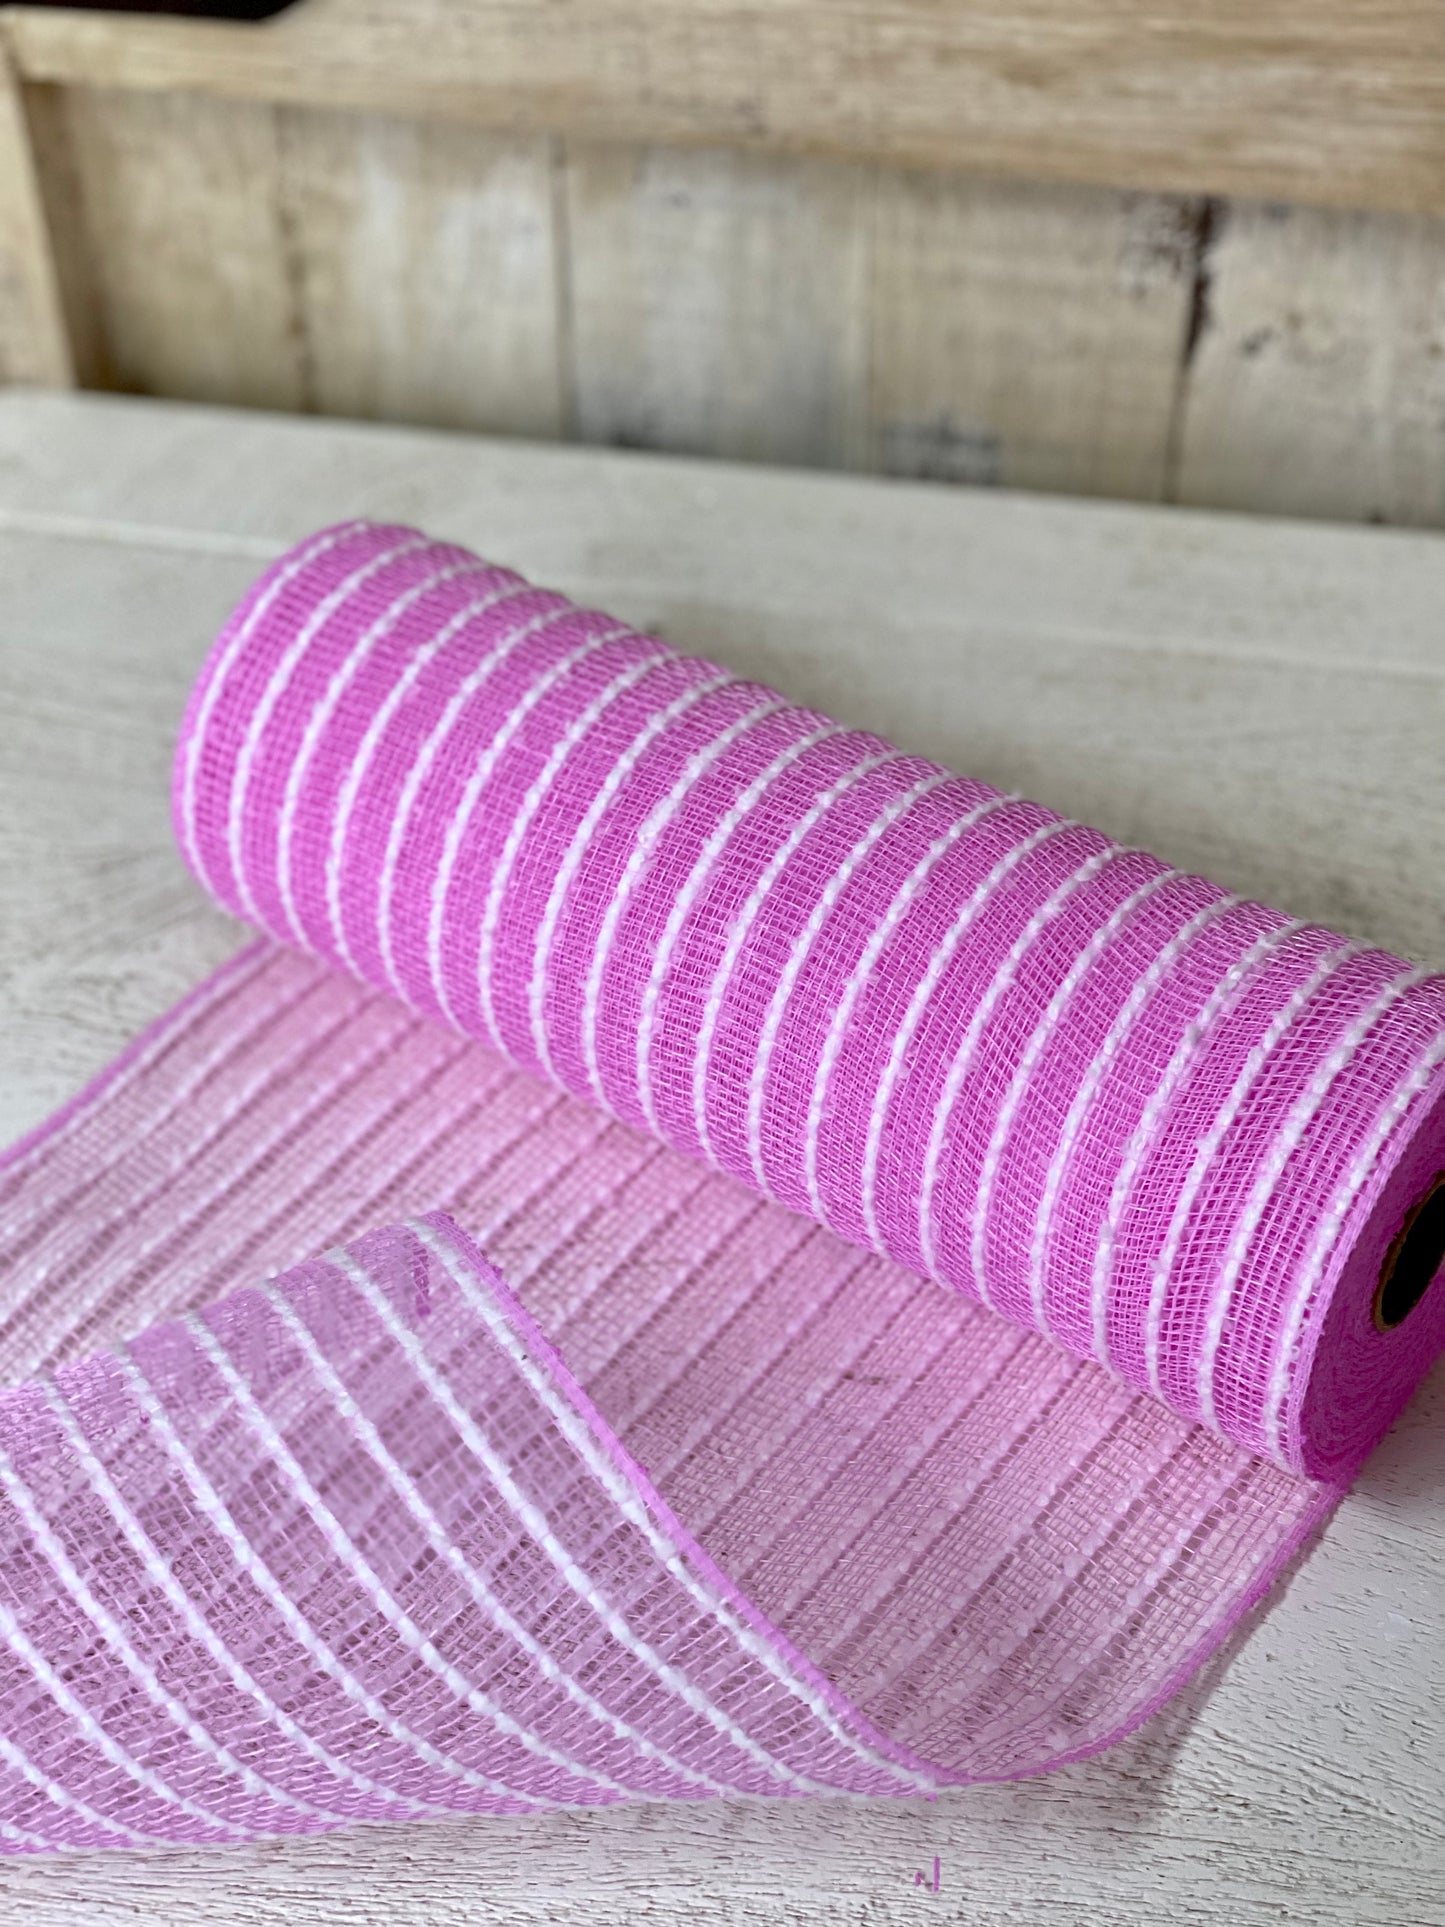 10.25 Inch By 10 Yard Pink And White Drift Mesh